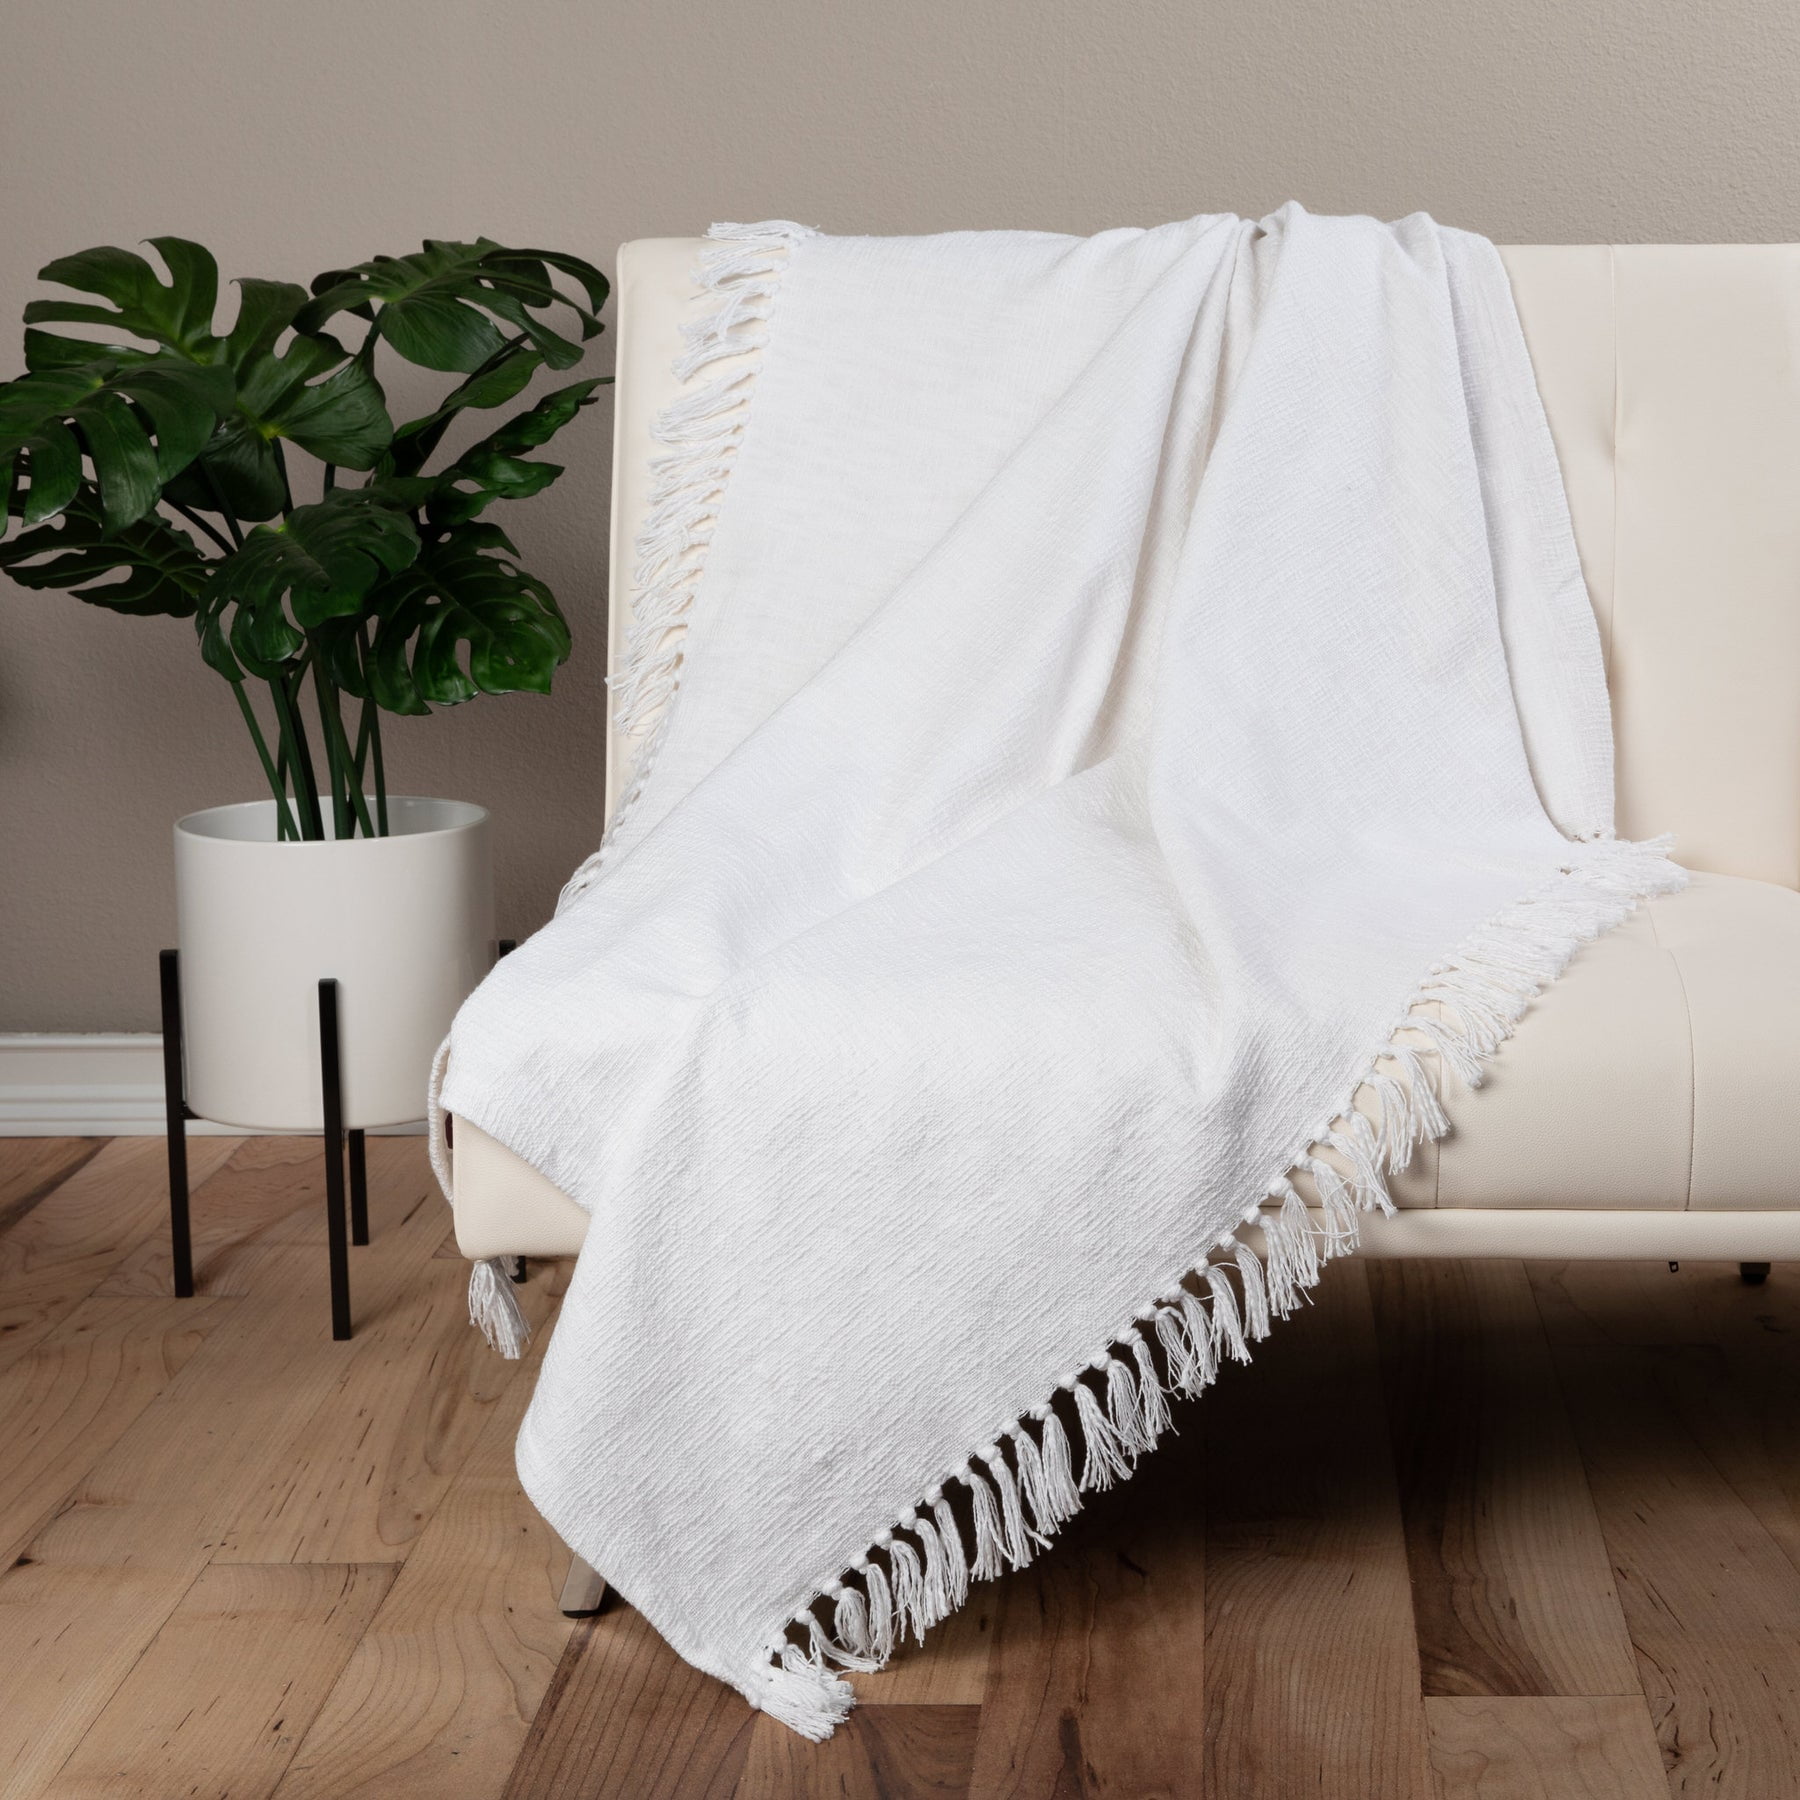 Sticky Toffee Cotton Throw Blanket for Couch, 60x50 in, Gray Boho Woven  Throw with Fringe, Textured Decorative Blankets 